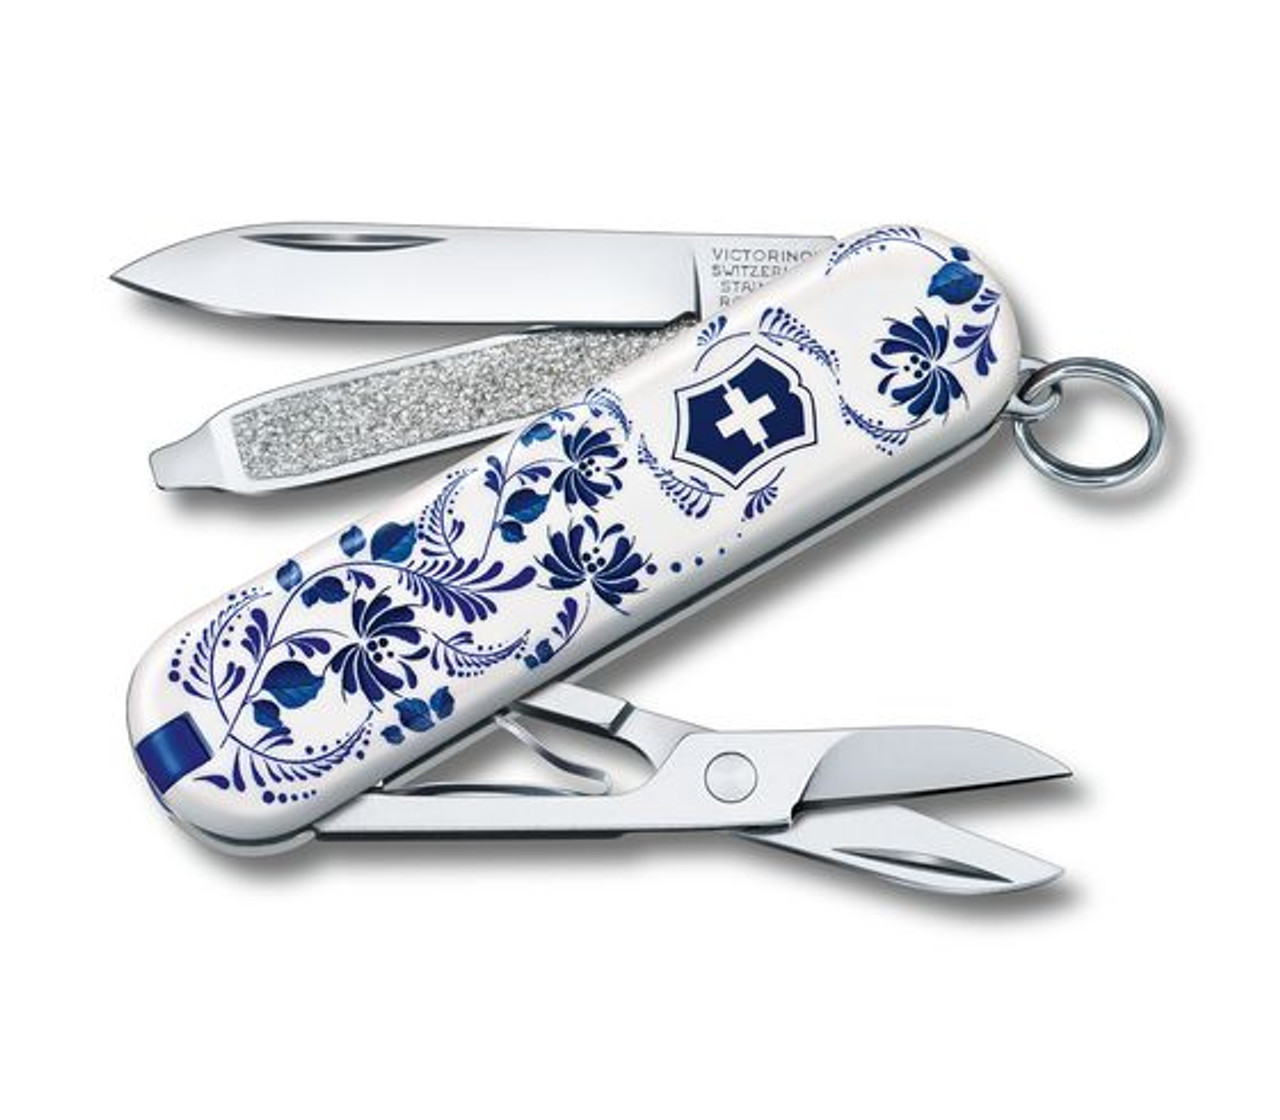 Victorinox Swiss Army Classic SD Limited Edition 2021 "Patterns of the World" - Porcelain Elegance - 0.6223.L2110